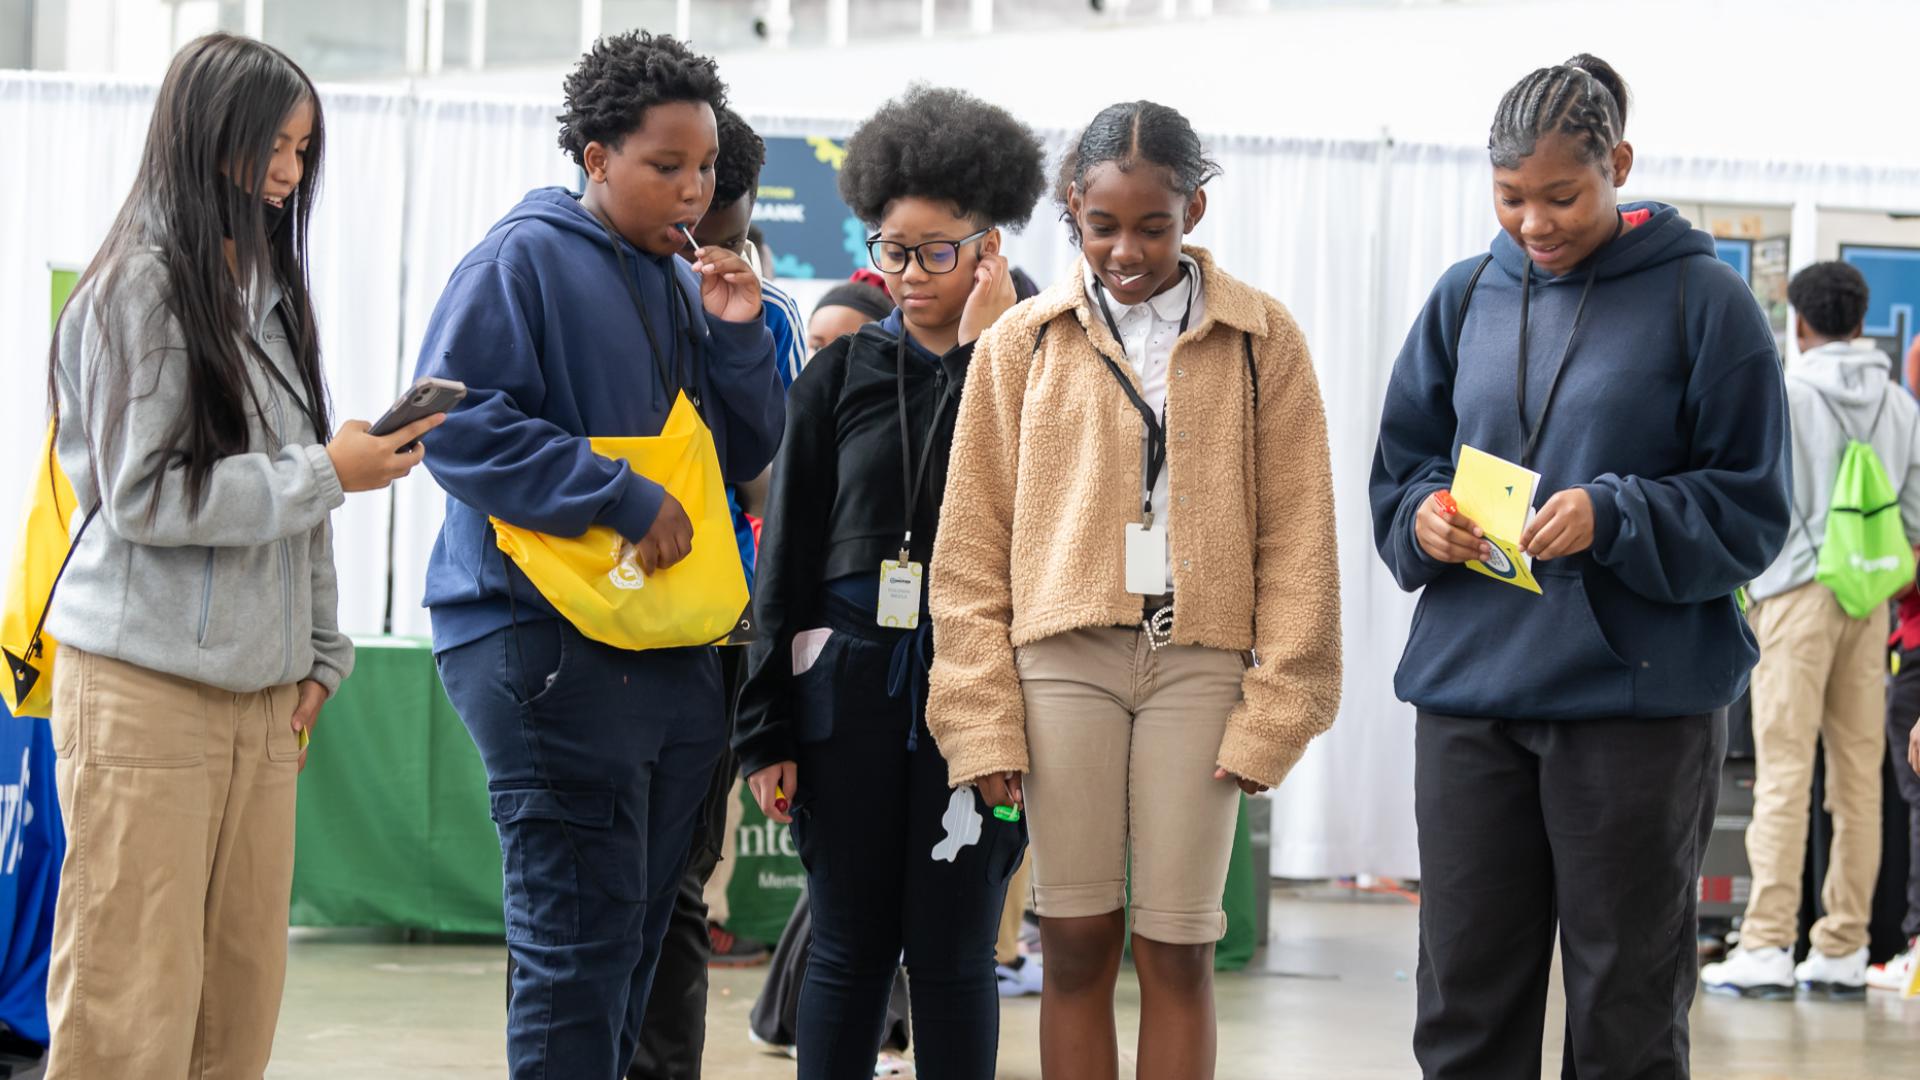 Junior Achievement (JA) of Memphis and the Mid-South is holding its Inspire career expo on May 14-16 at the Agricenter.